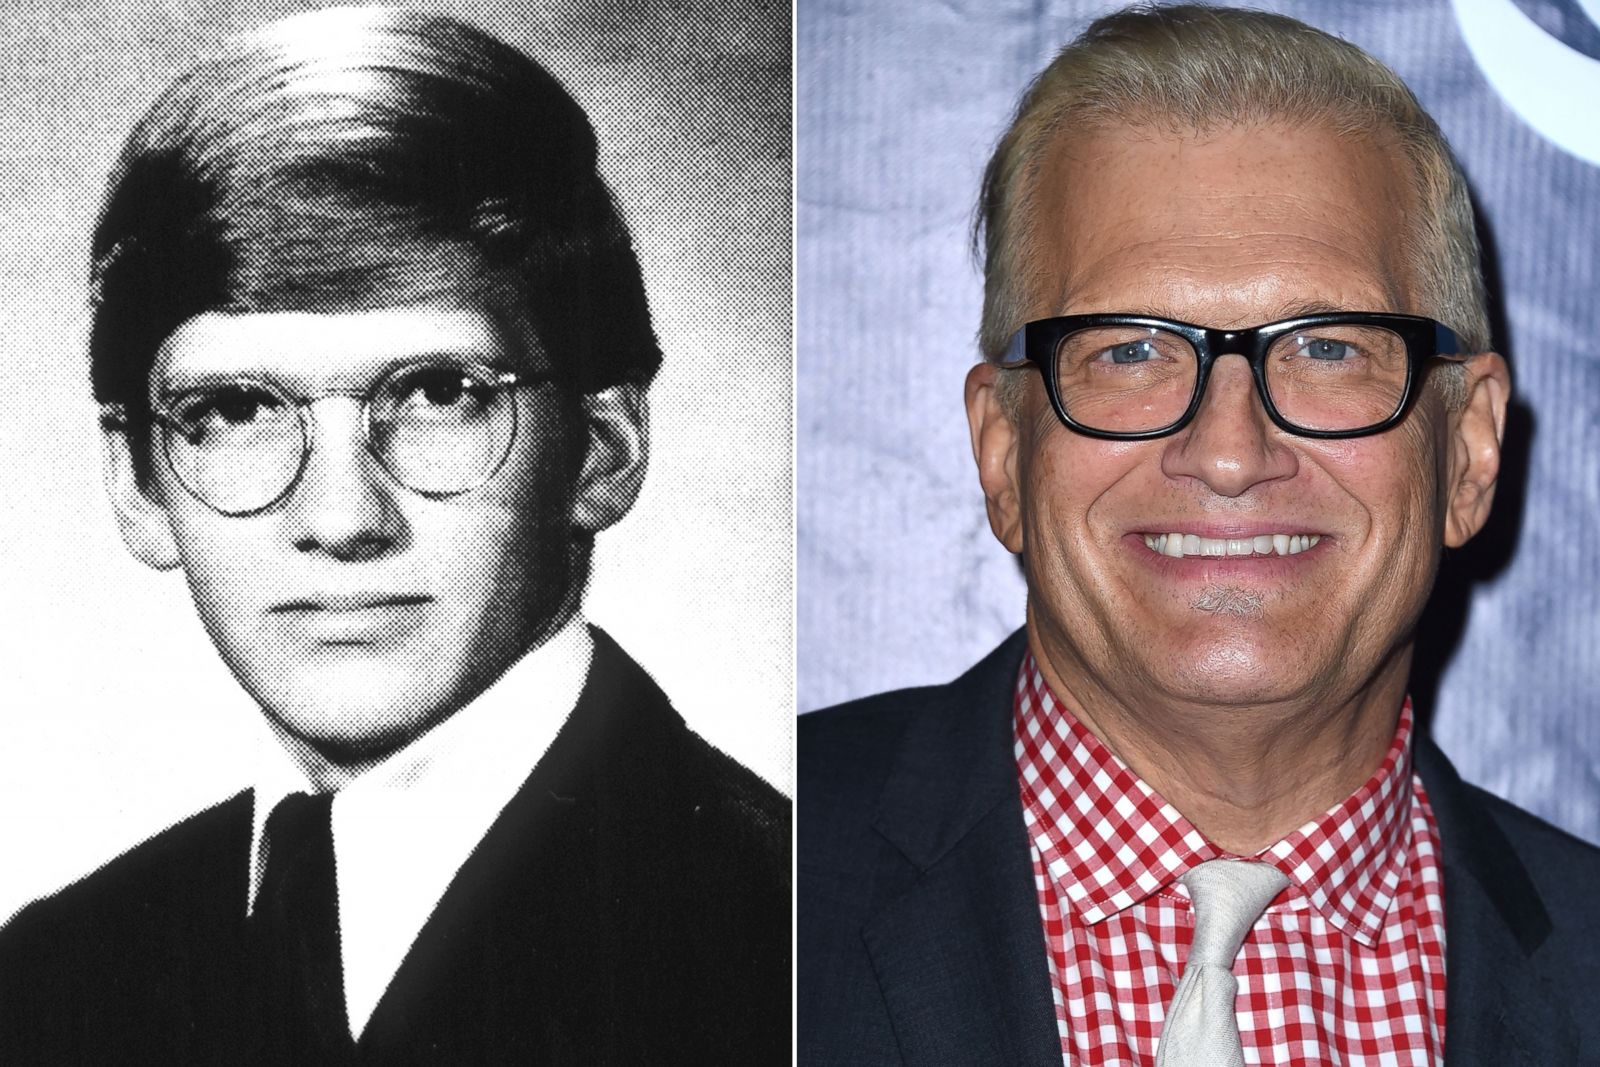 9. Drew Carey's Blonde Hair: The Inspiration Behind the New Look - wide 4